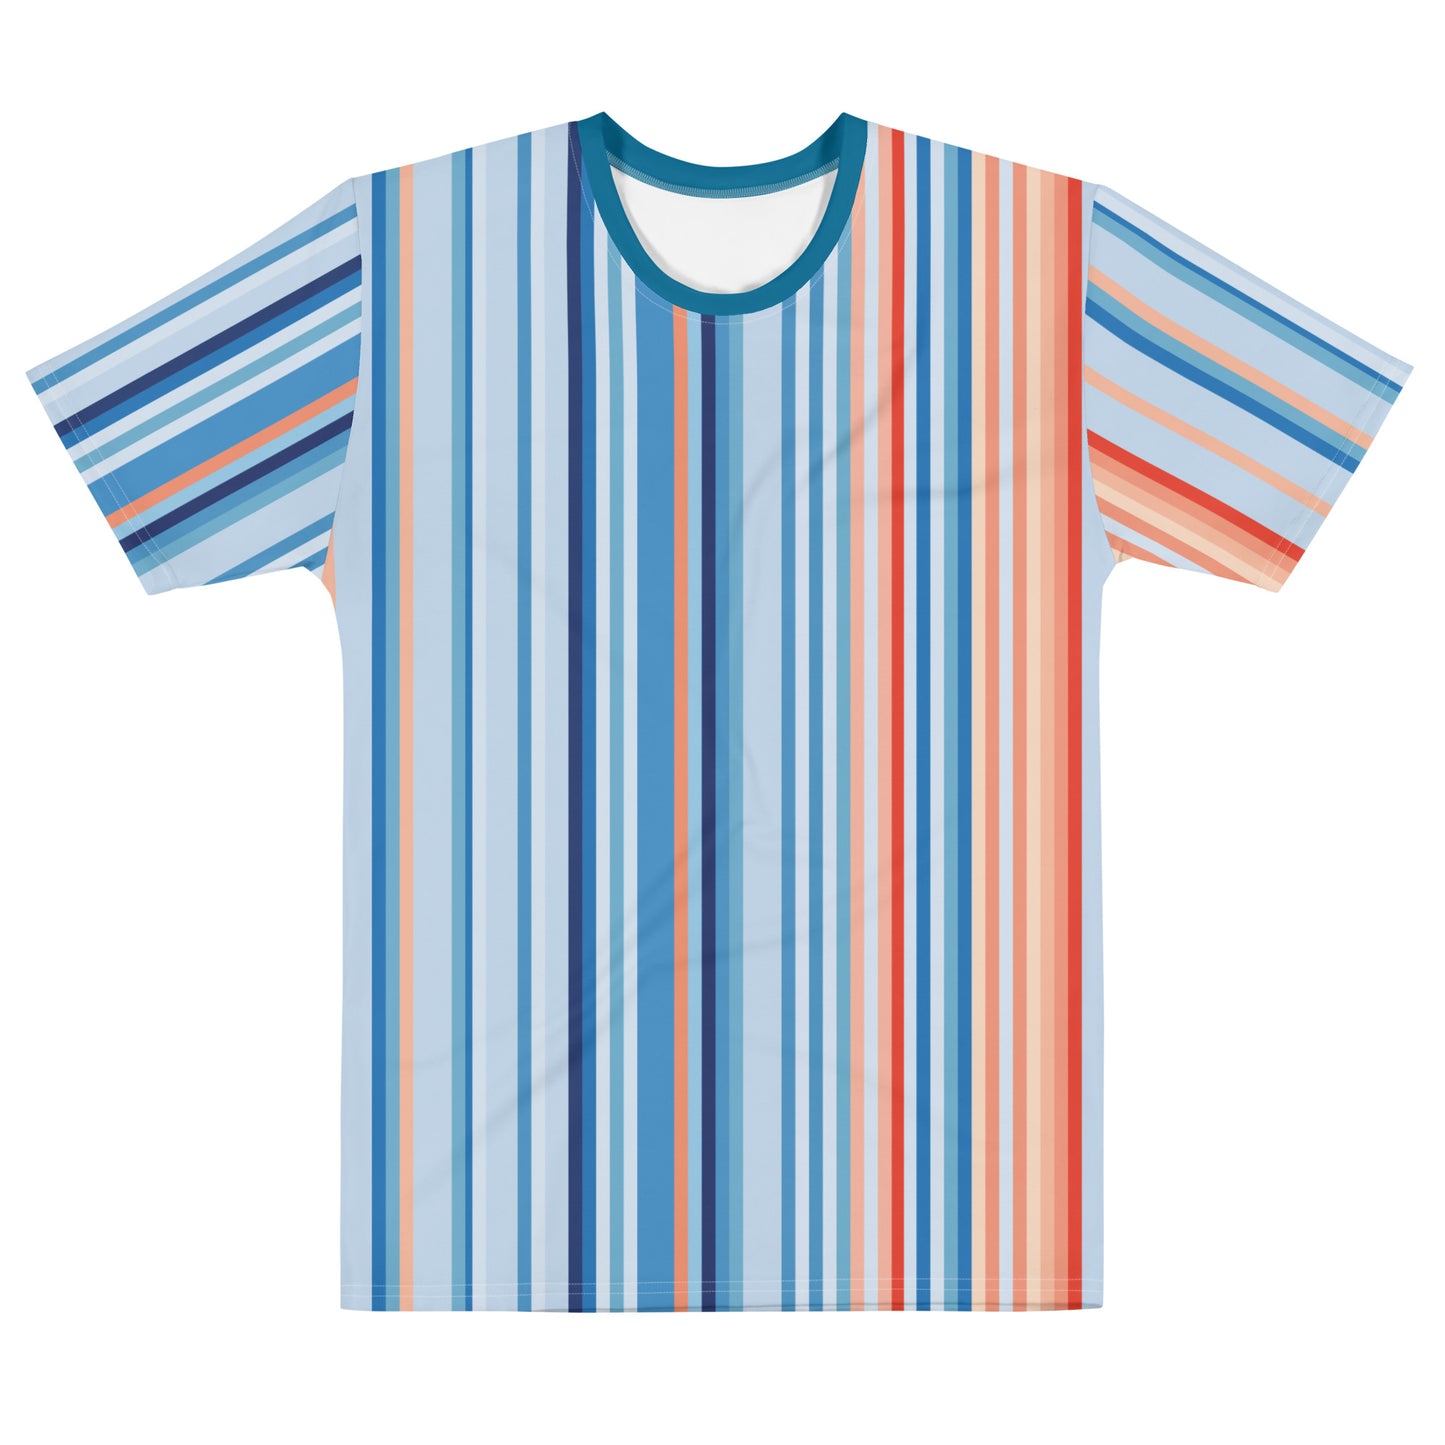 Climate Change Global Warming Stripes - Sustainably Made Men's T-shirt vertical